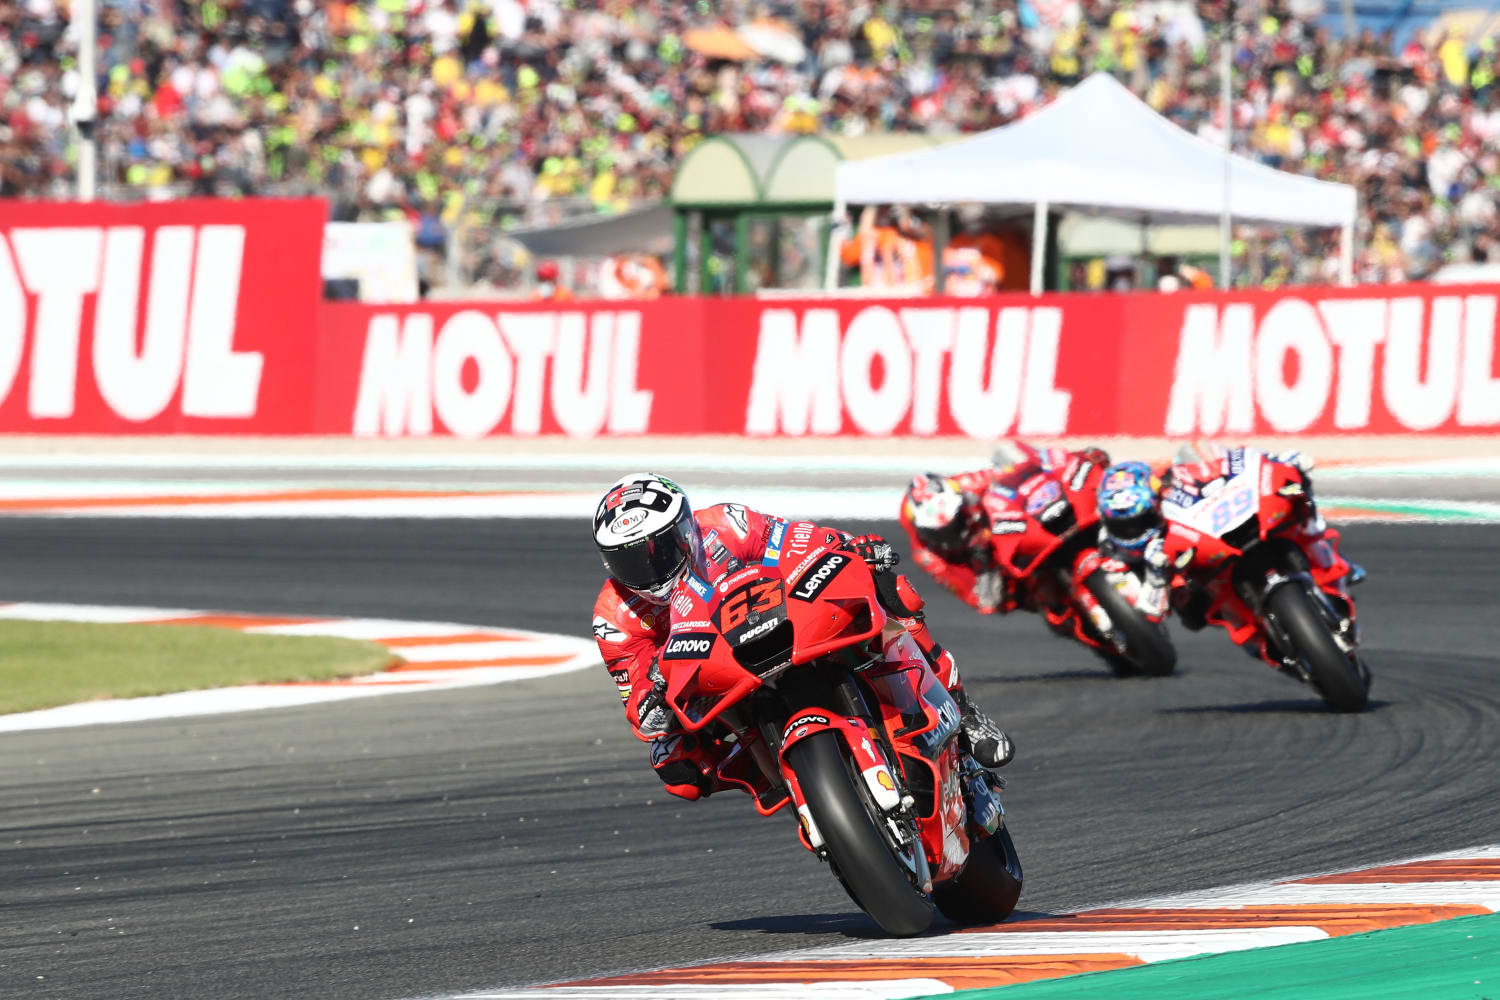 MotoGP Valencia 2021 race report and results